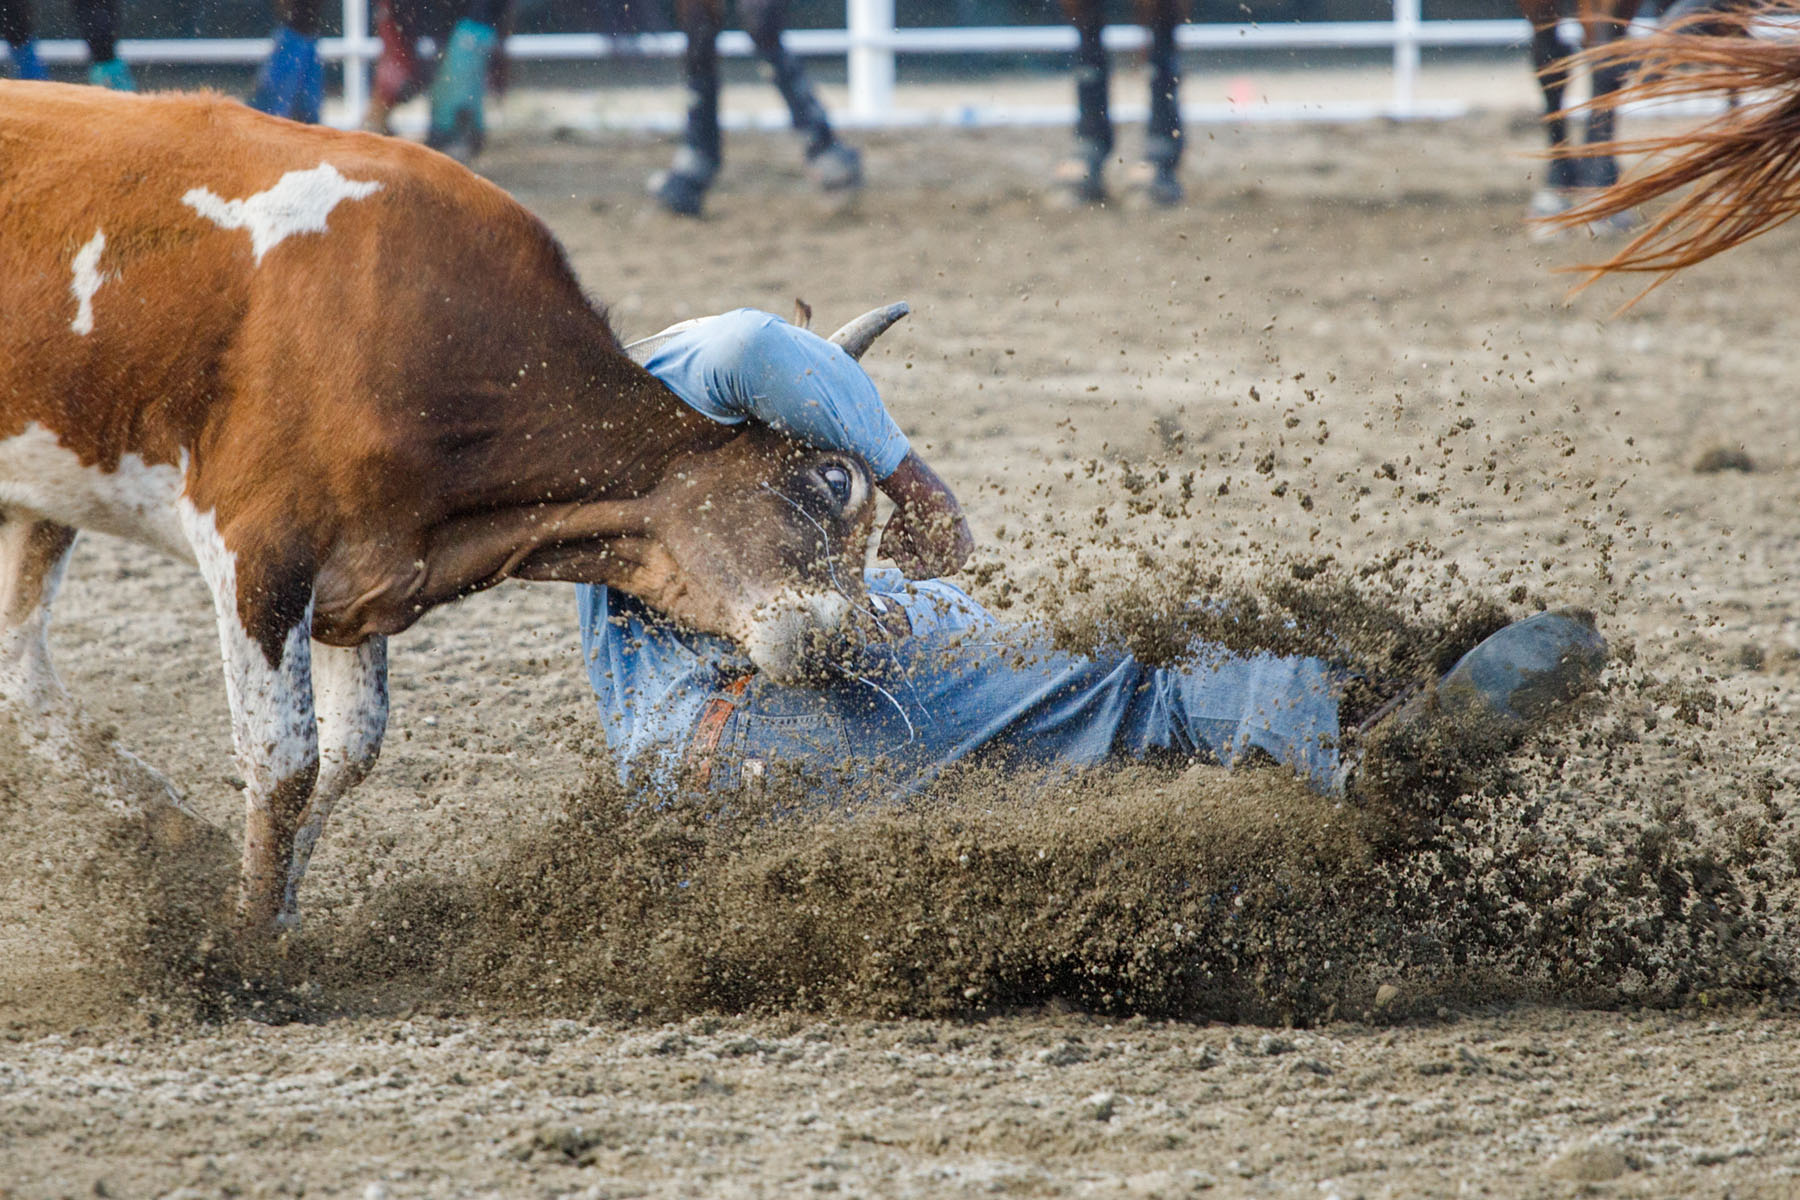 Steer Wrestling, Home of Champions Rodeo, Red Lodge, MT.  Click for next photo.